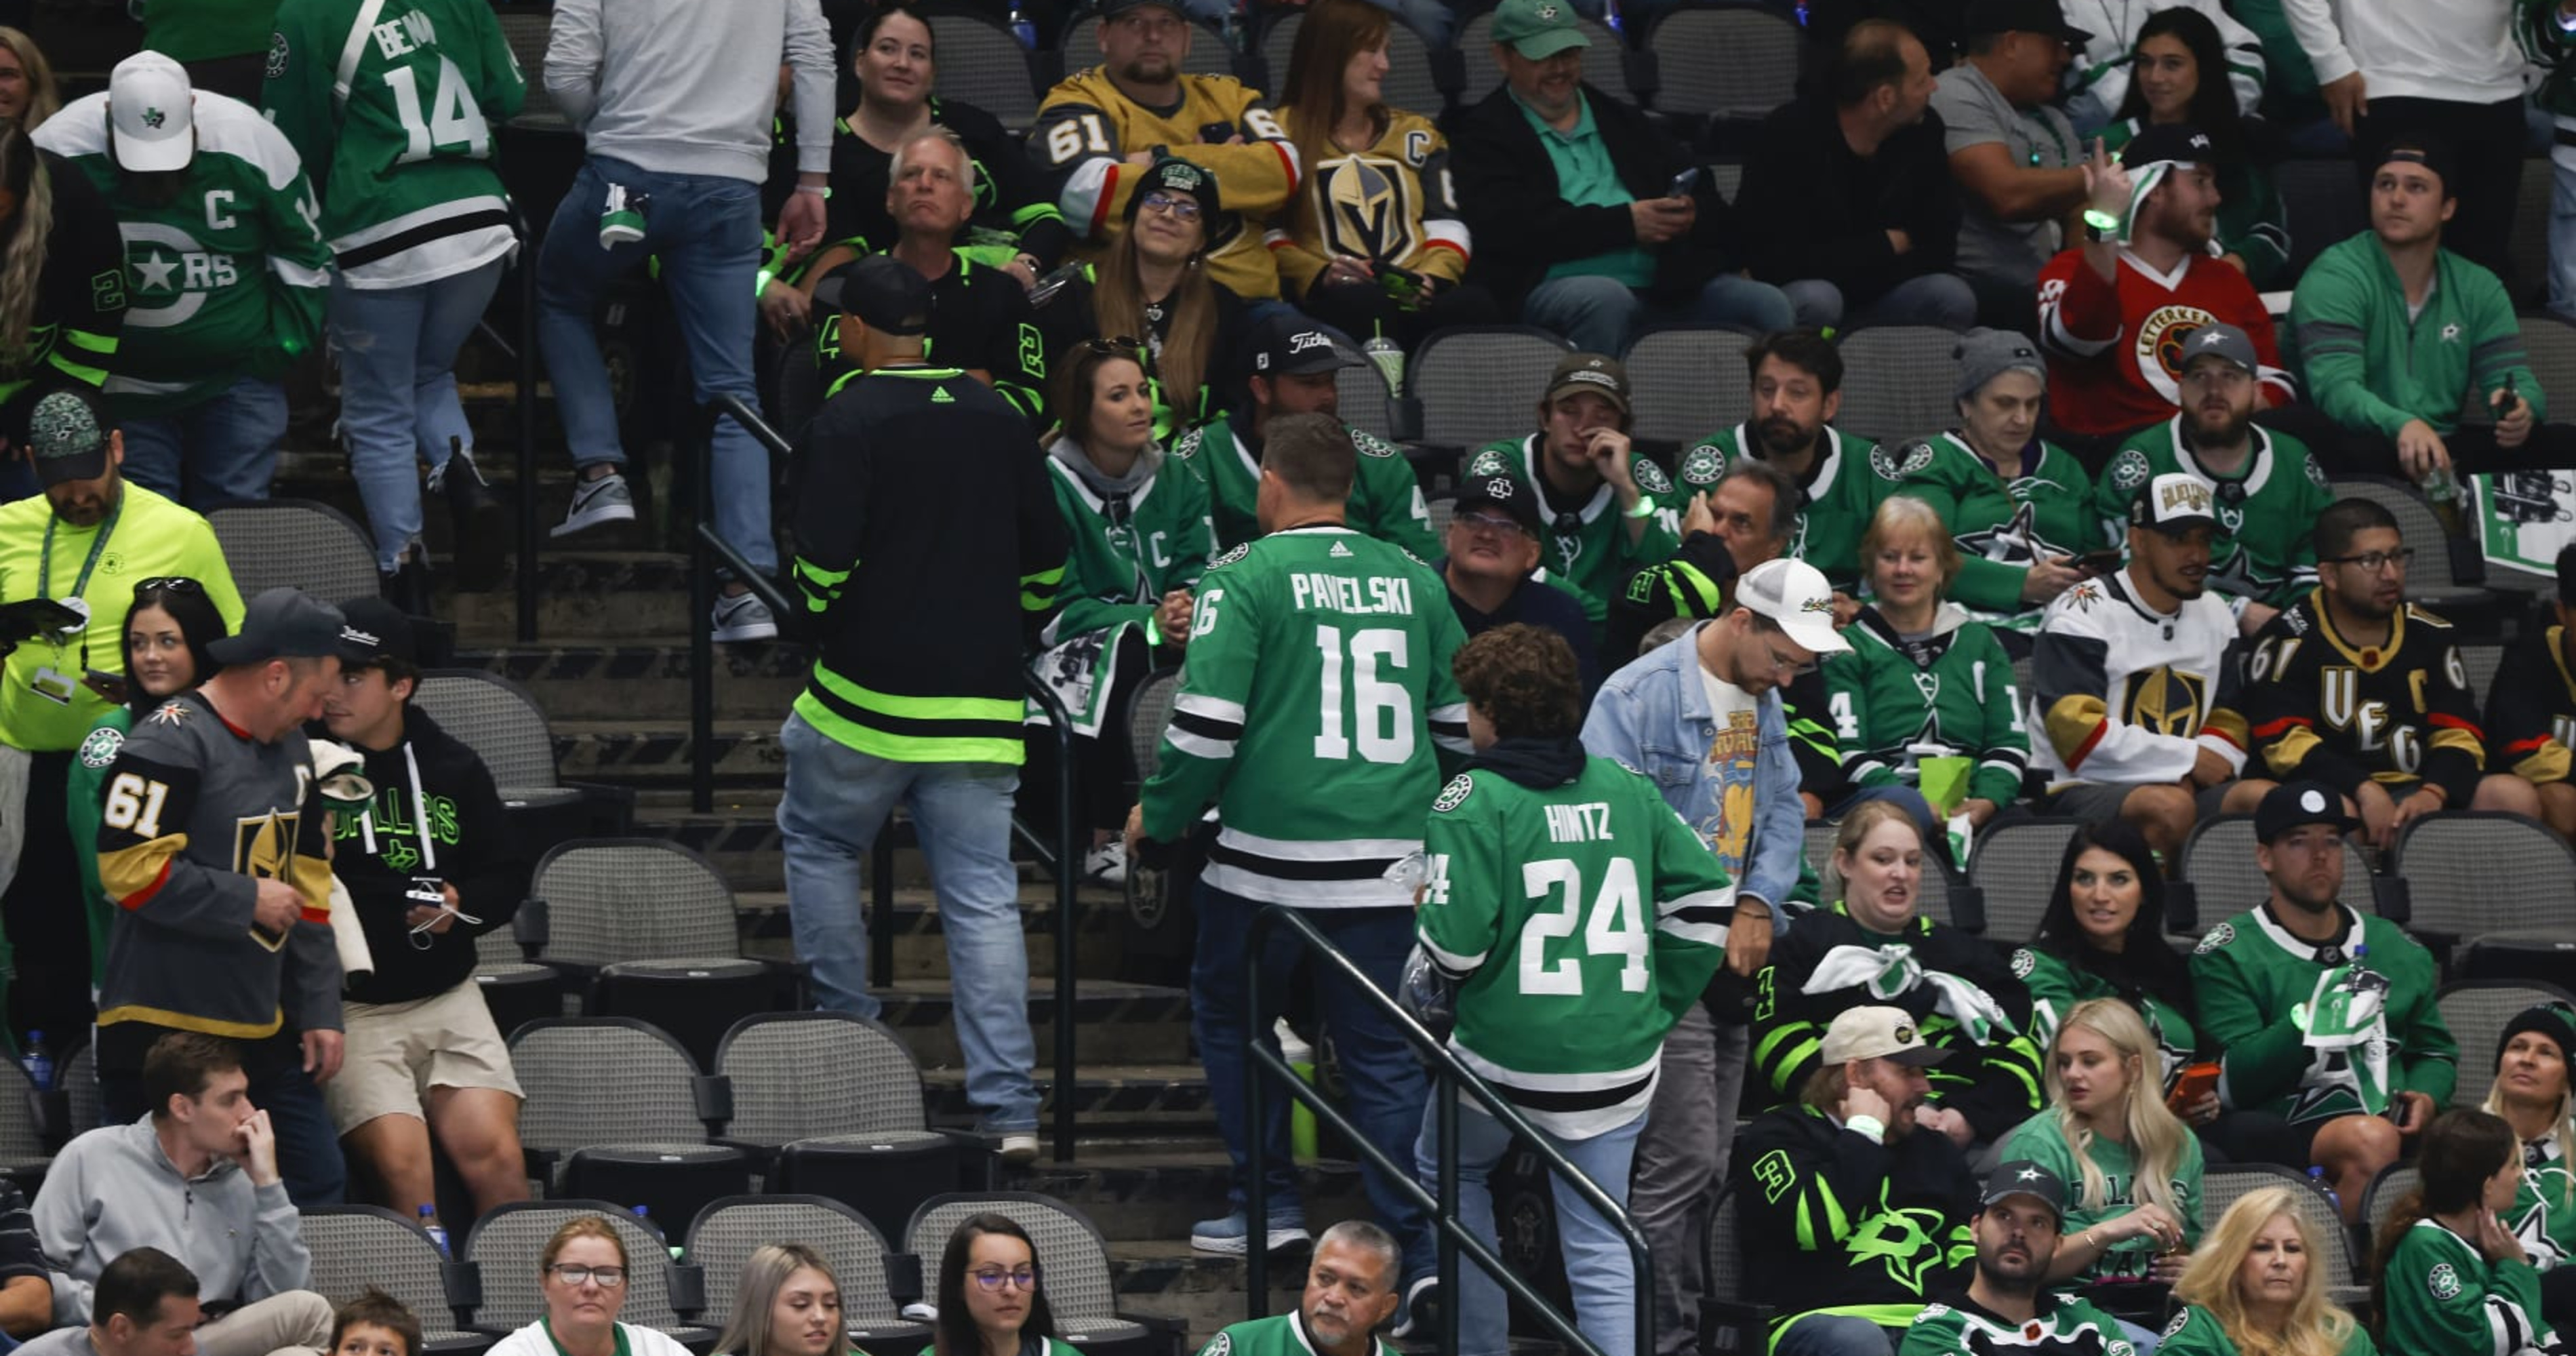 Dallas Stars entered needless controversy by getting involved in